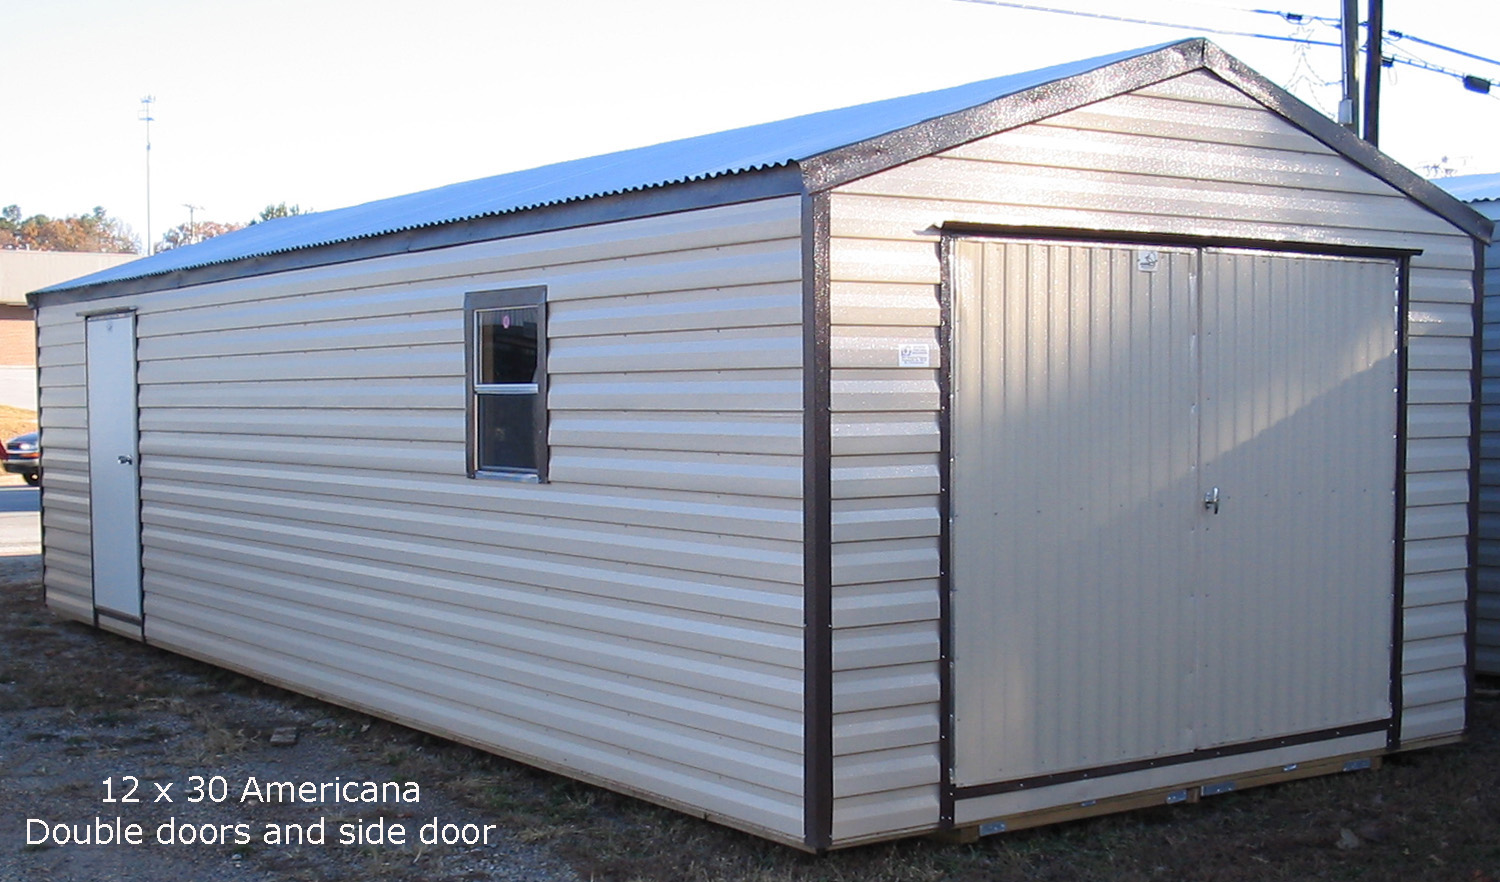 Portable Sheds Are Great To Empty Out Your Garage And Get Organized